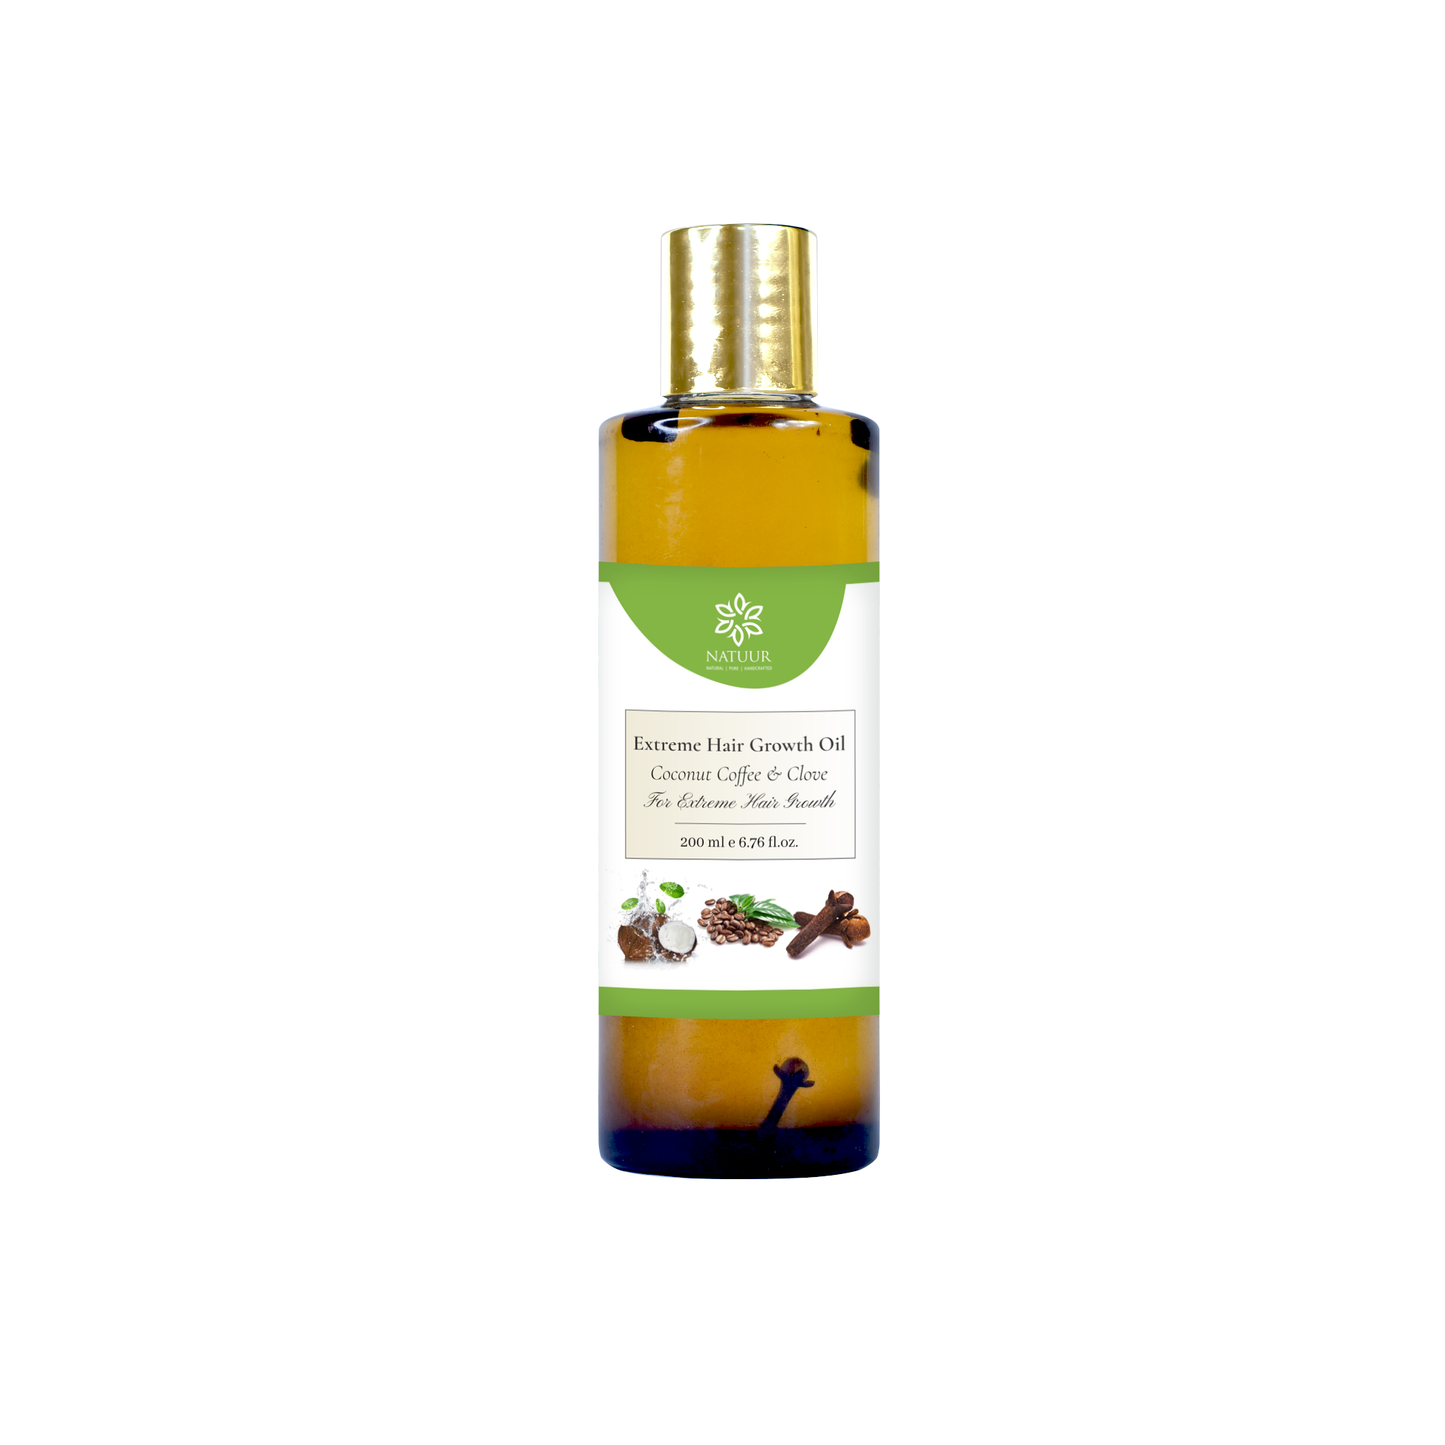 Coconut coffee clove oil - extreme hair growth 200ml - Natuur.in